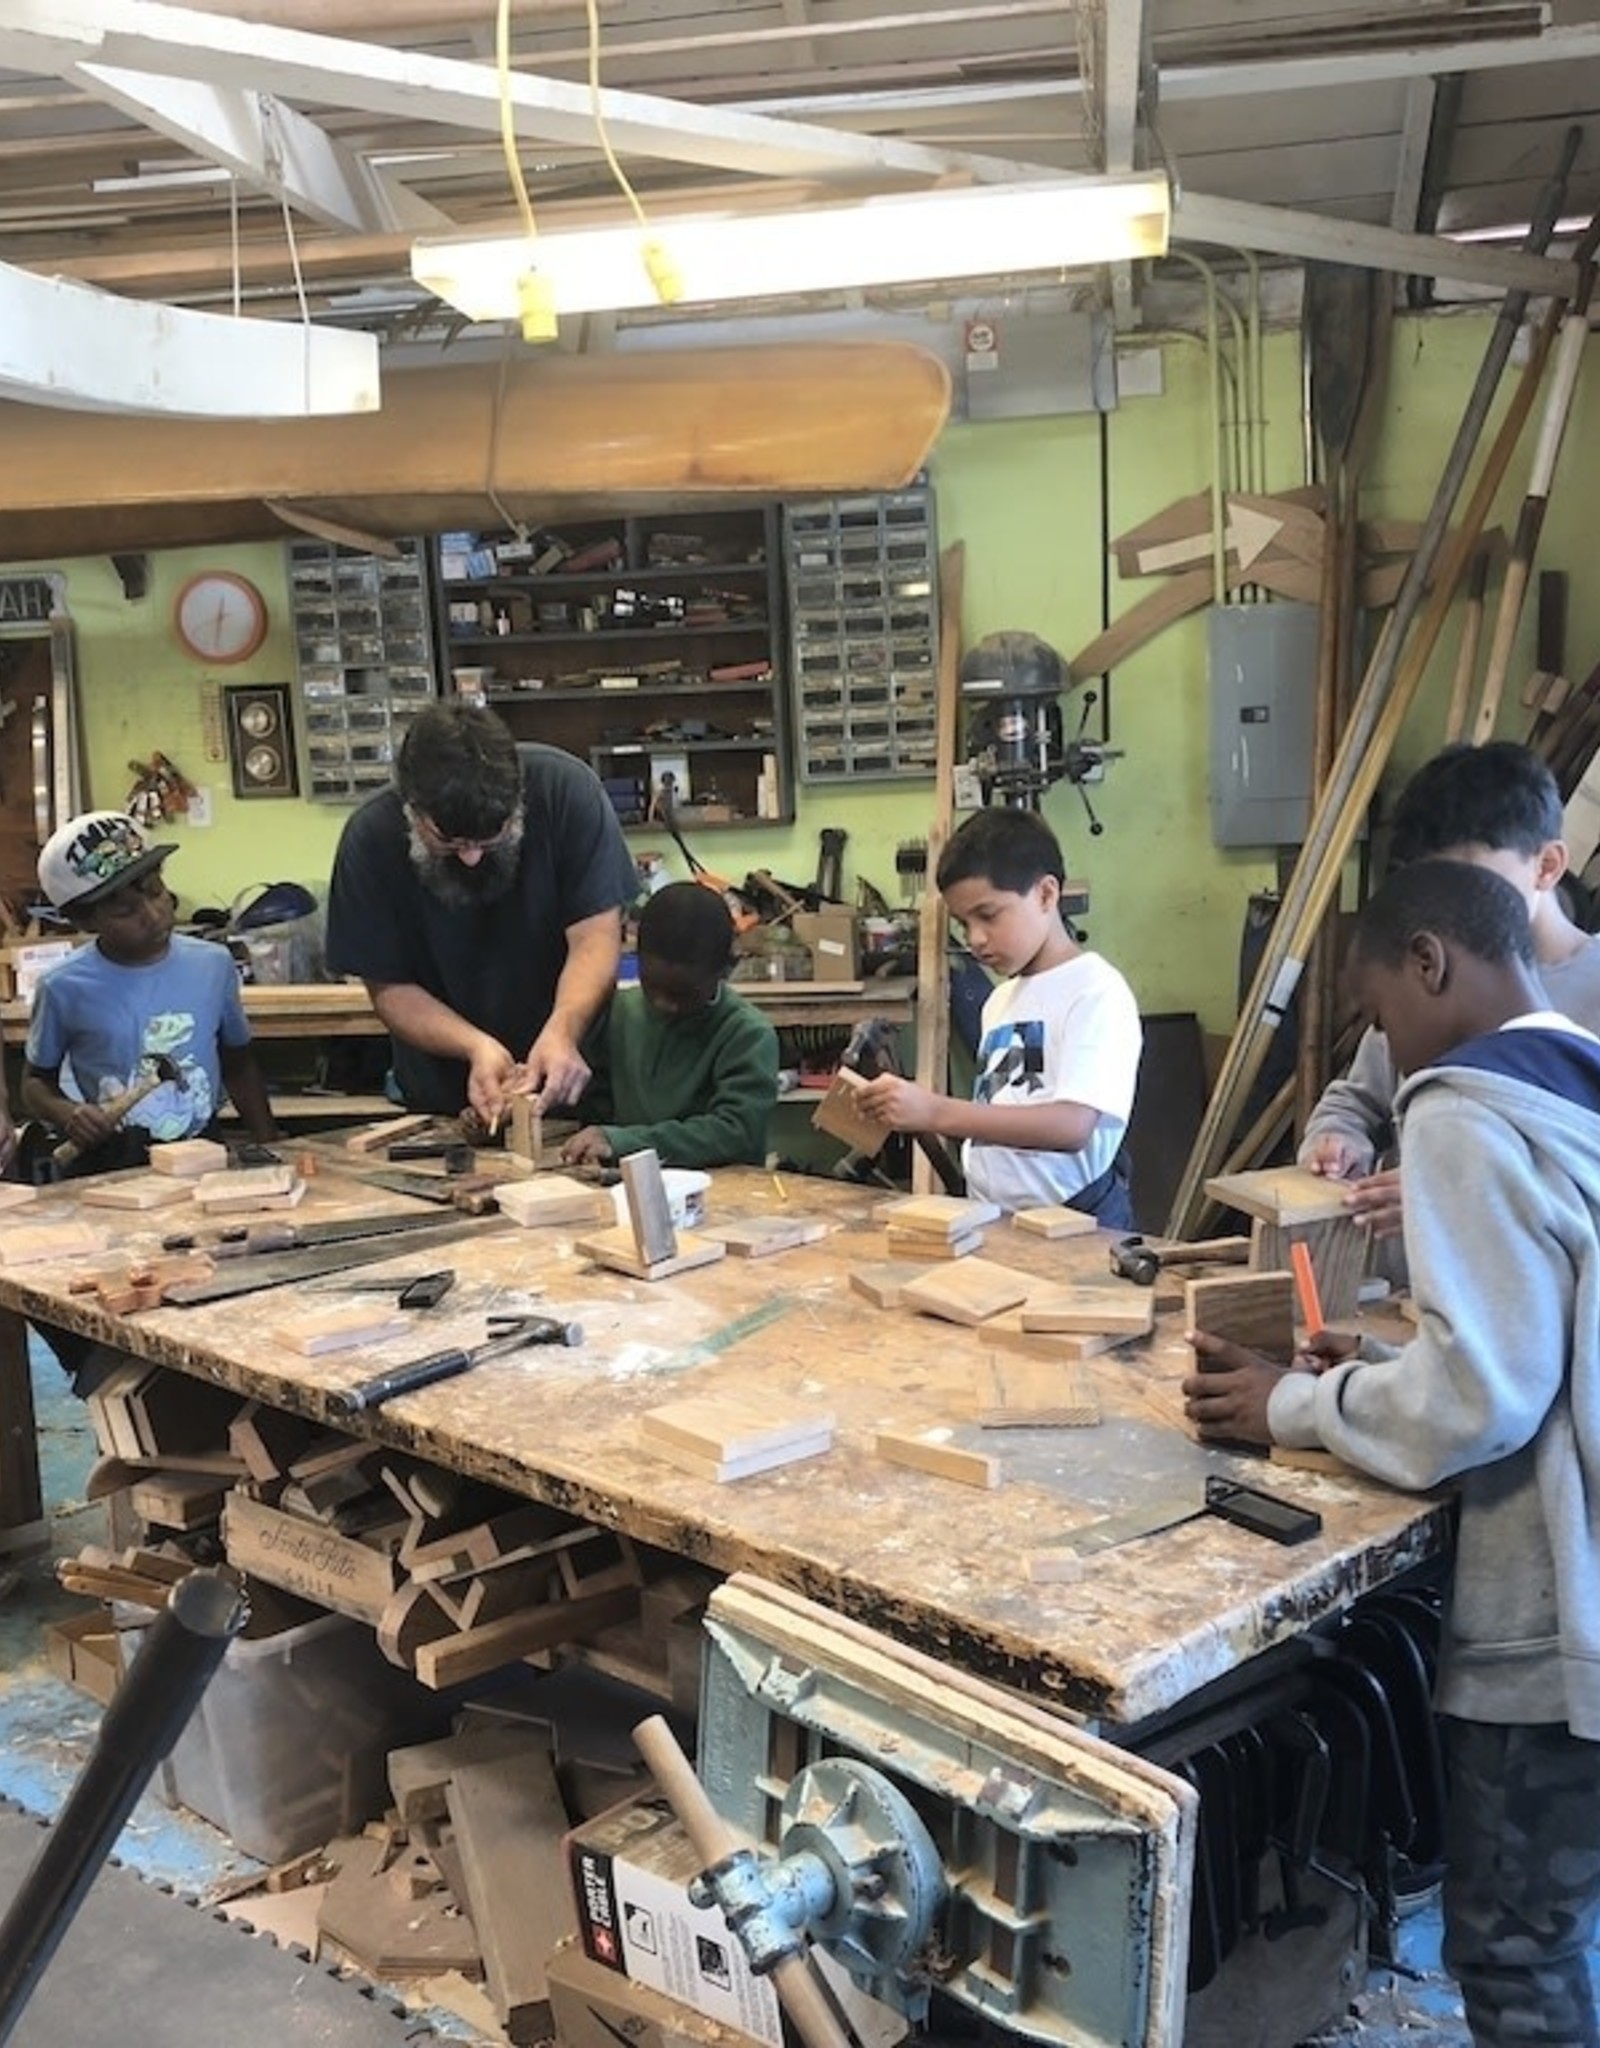 Sunday Woodworking Class - 6 sessions